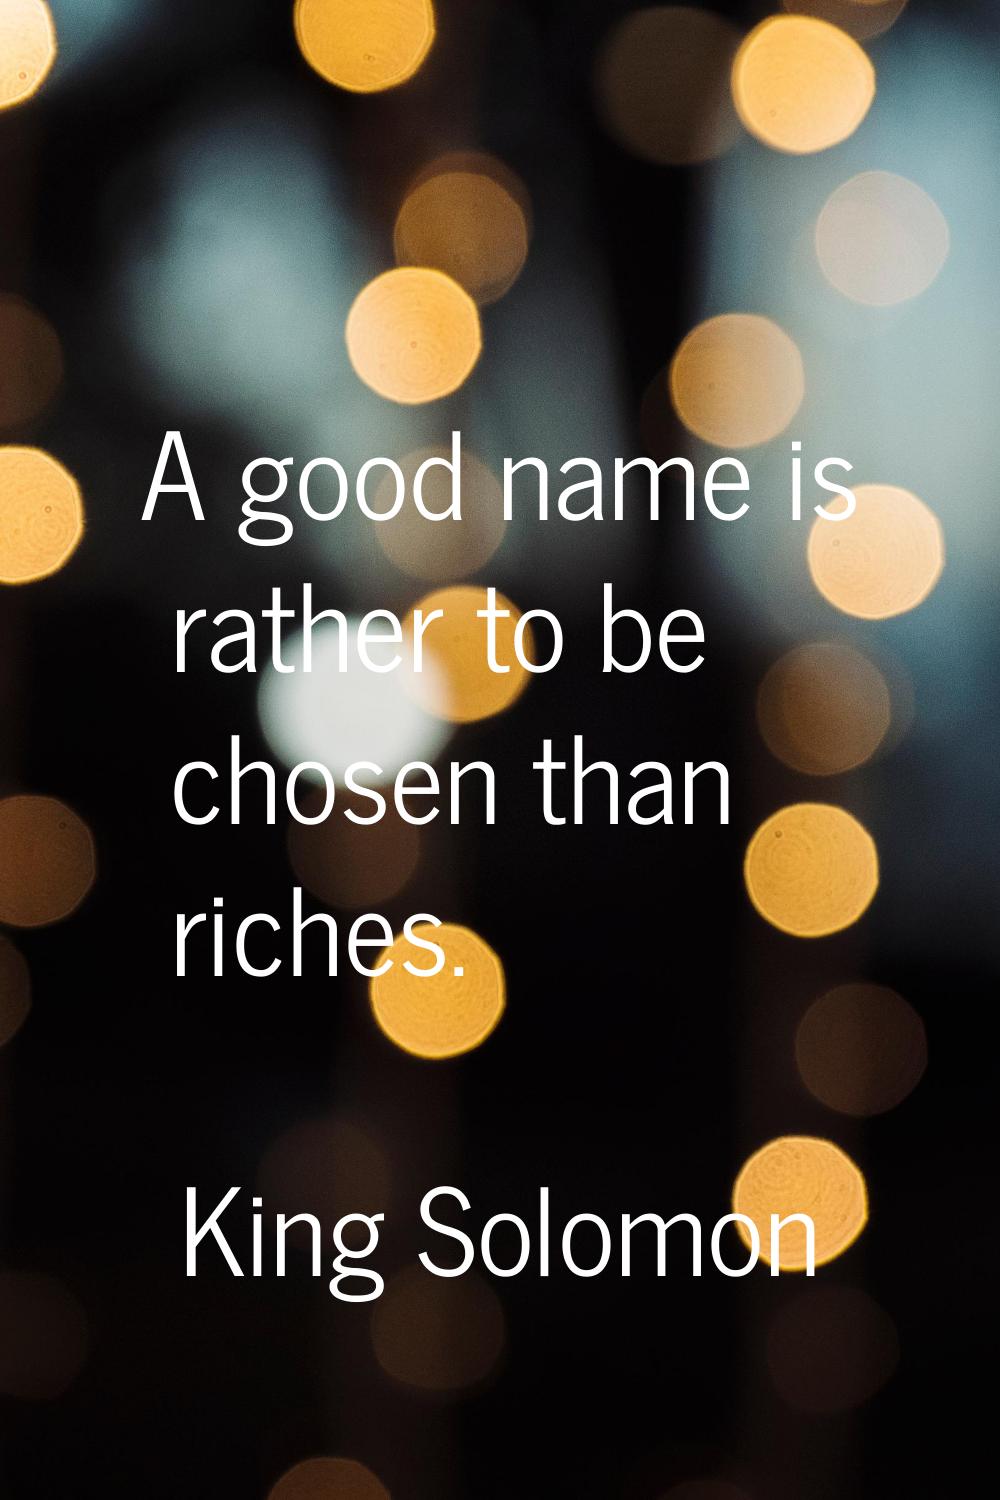 A good name is rather to be chosen than riches.